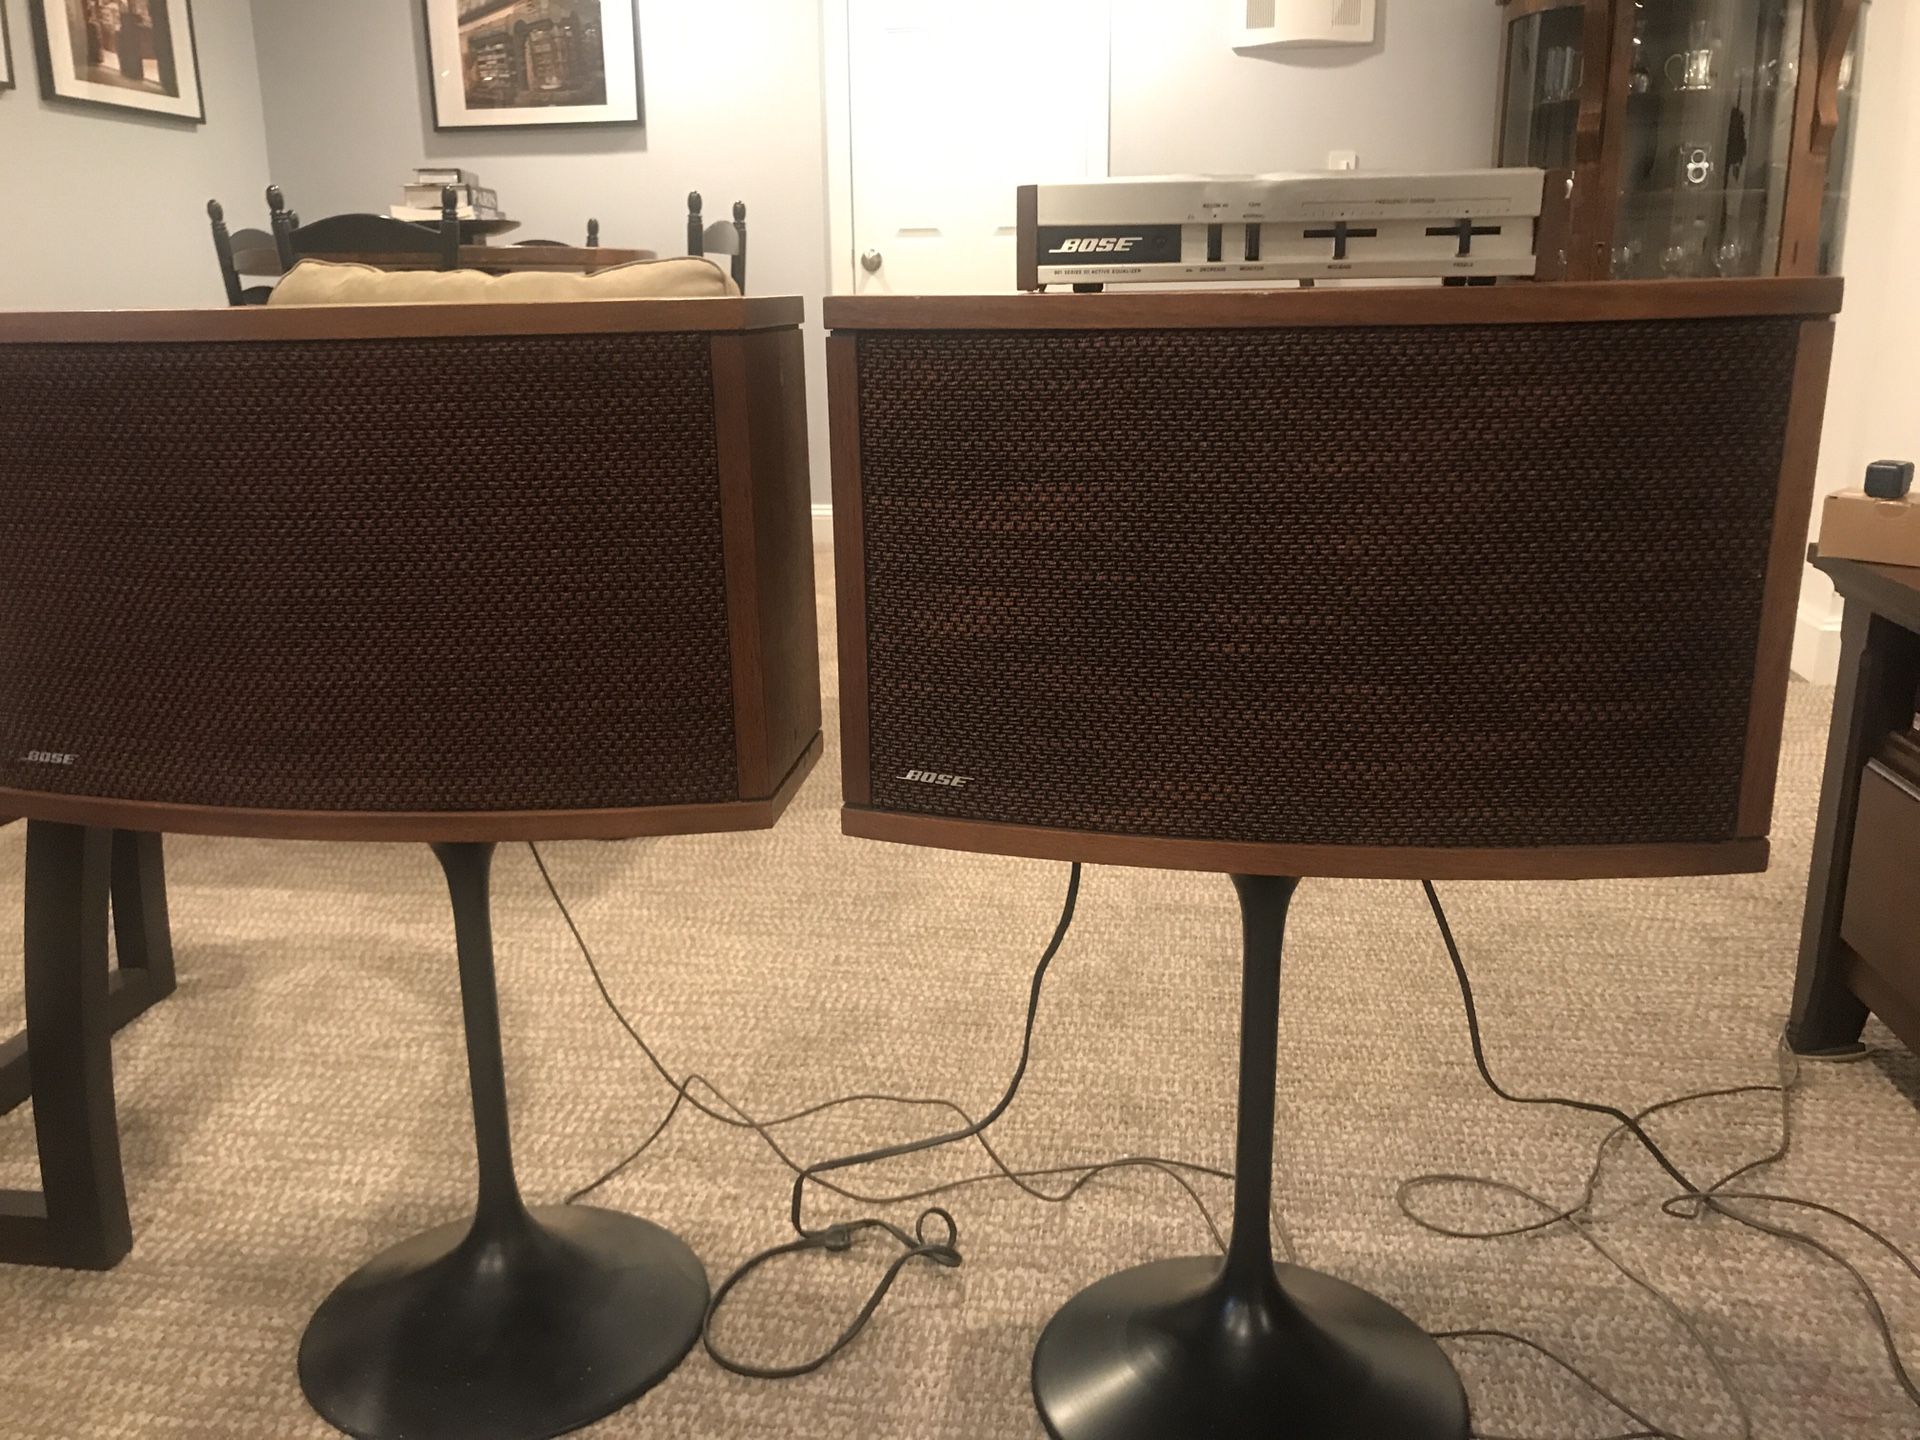 Set of 2 Bose speakers 901 series with equalizer